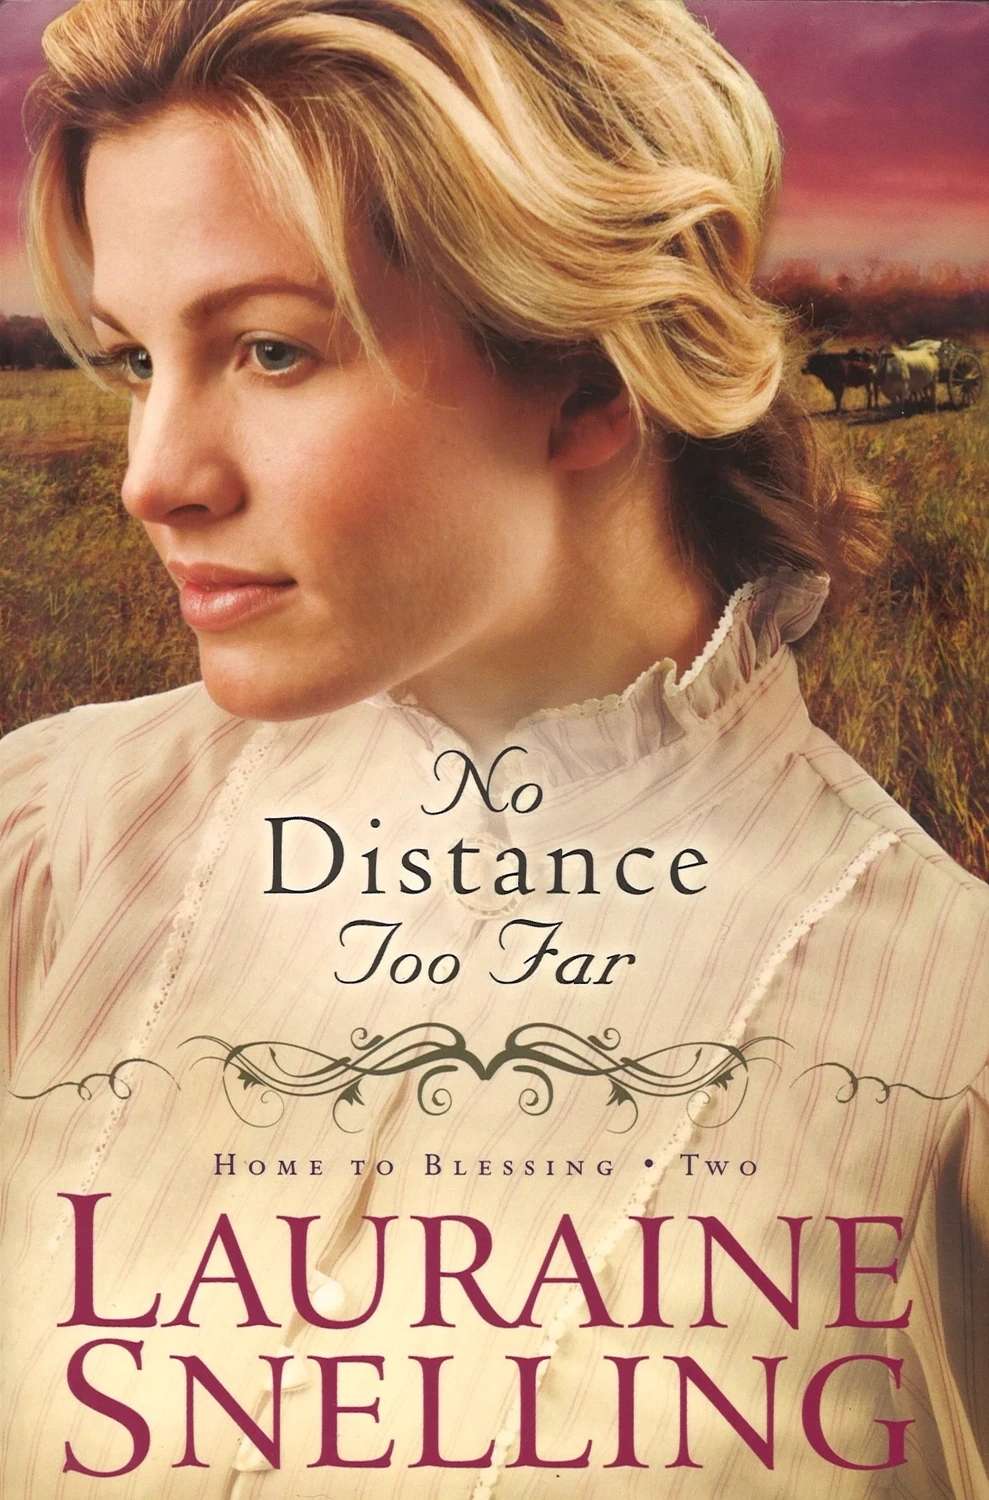 No Distance Too Far (Home to Blessing, 2) by Lauraine Snelling